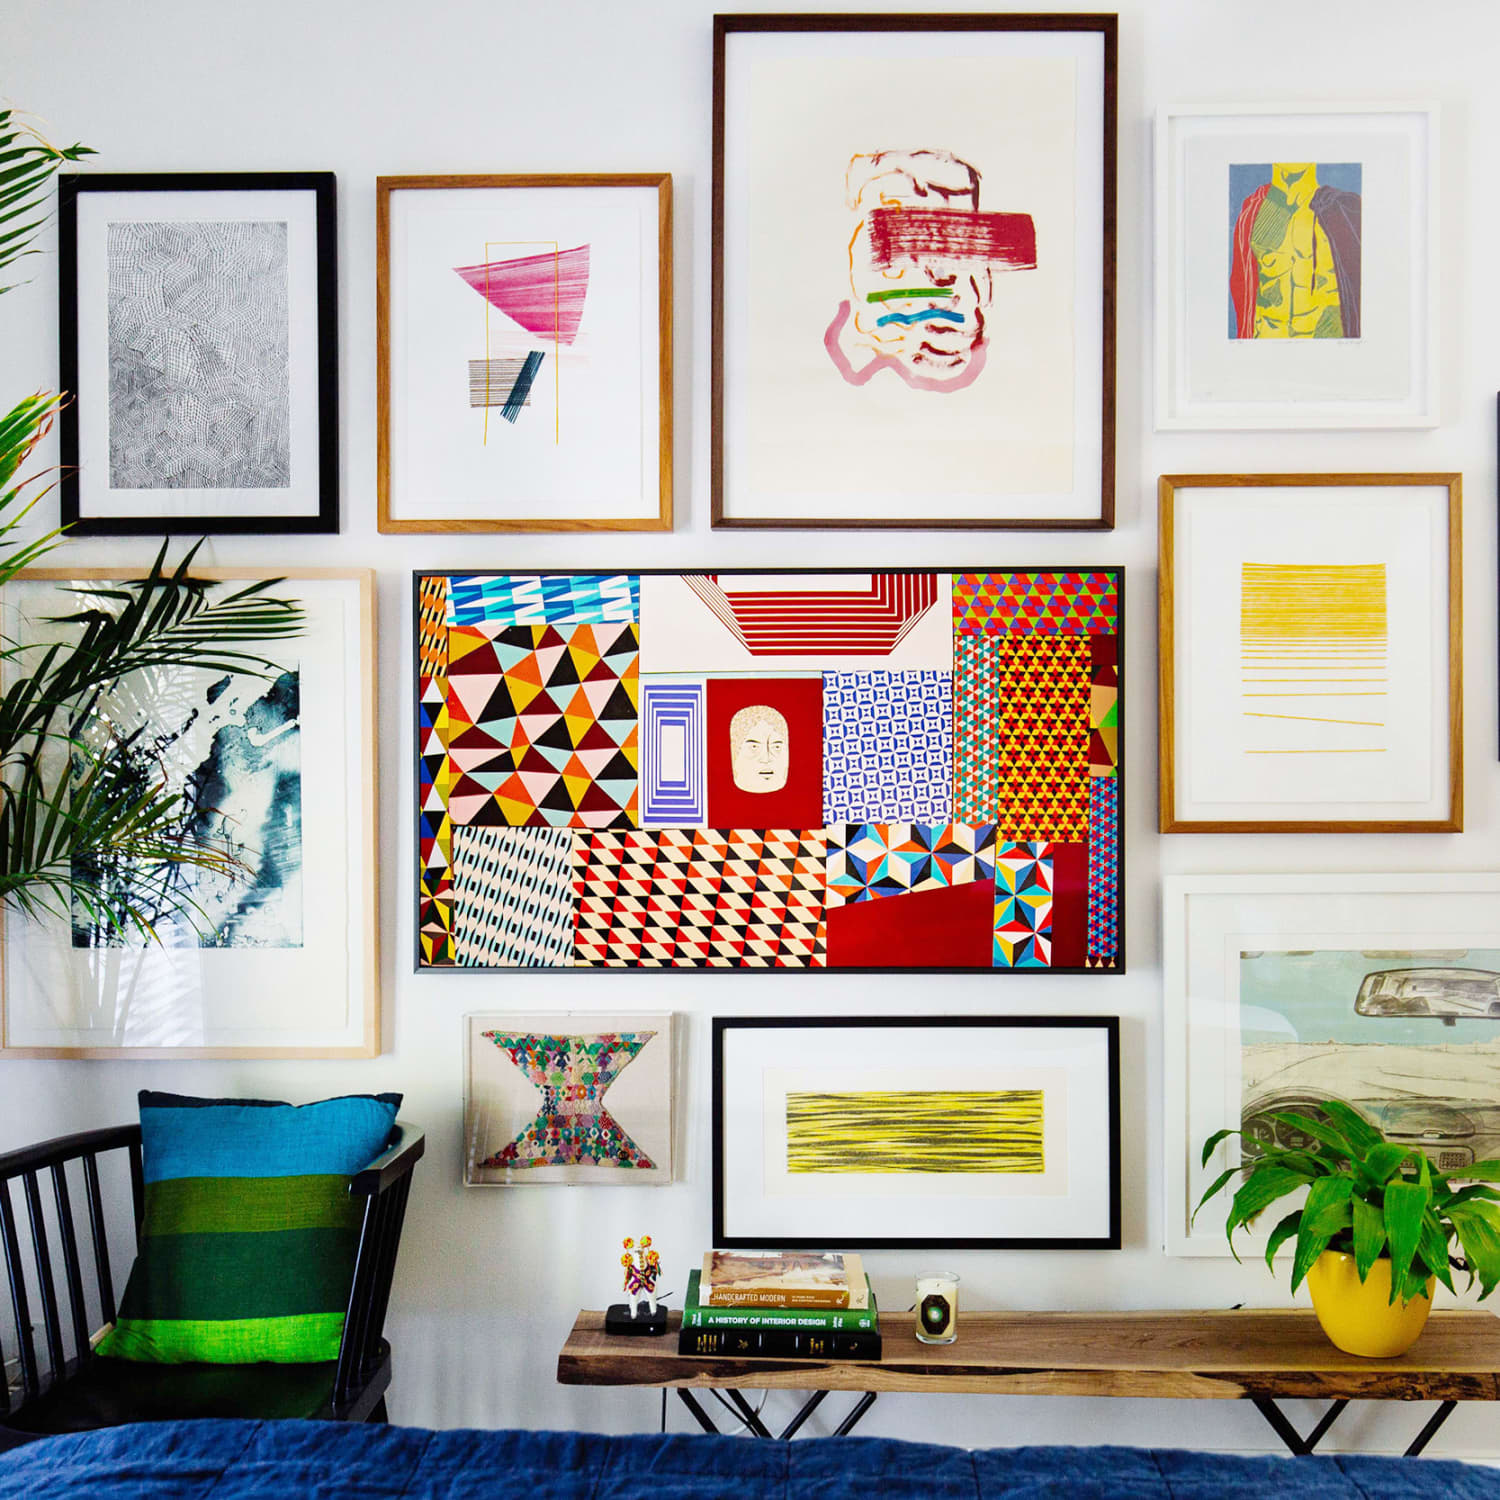 Gallery Wall Ideas: 22 Creative Ways To Make A Picture Wall